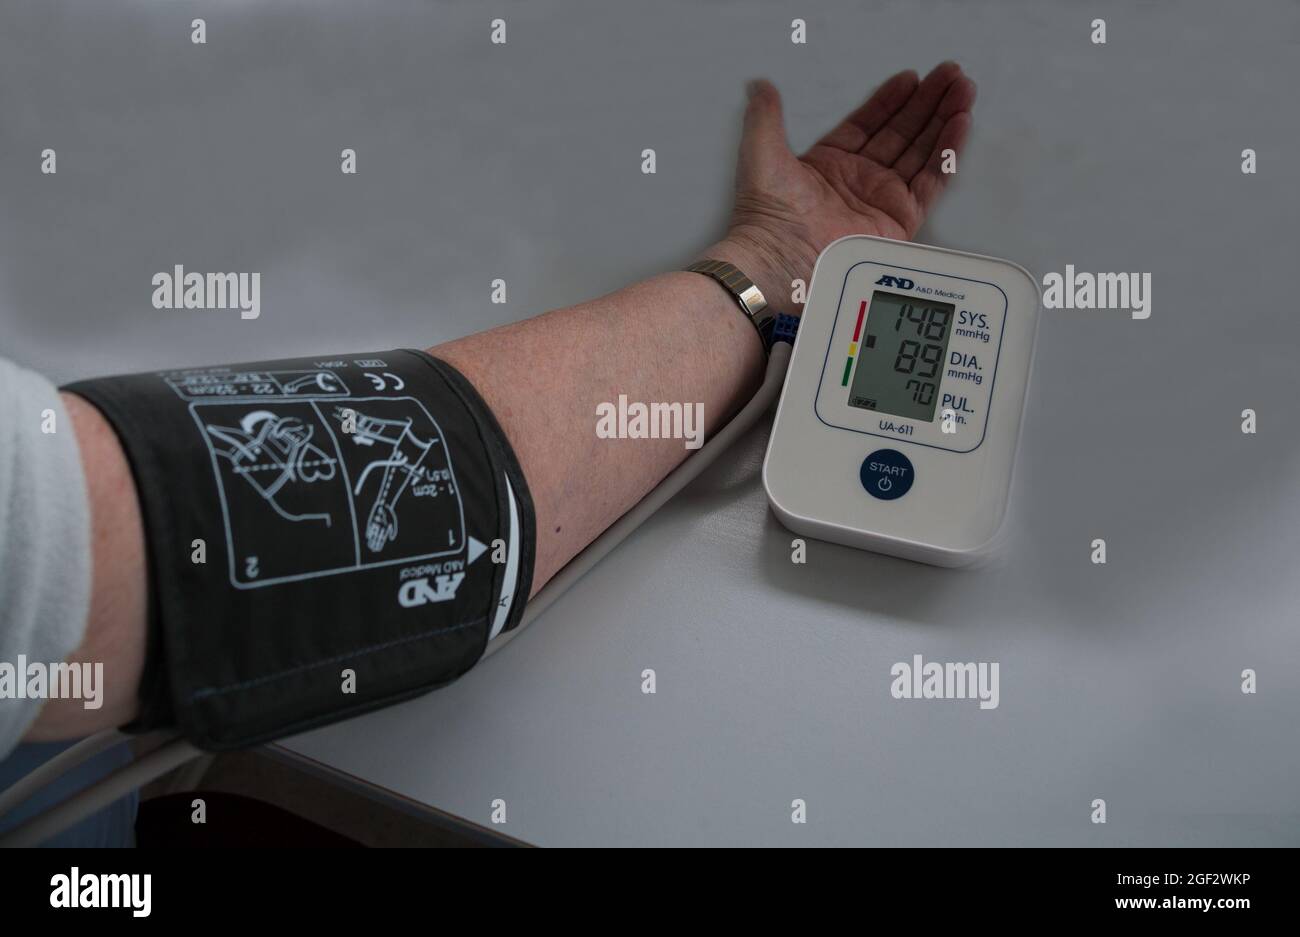 BP 170 At-Home Automatic Blood Pressure Monitor